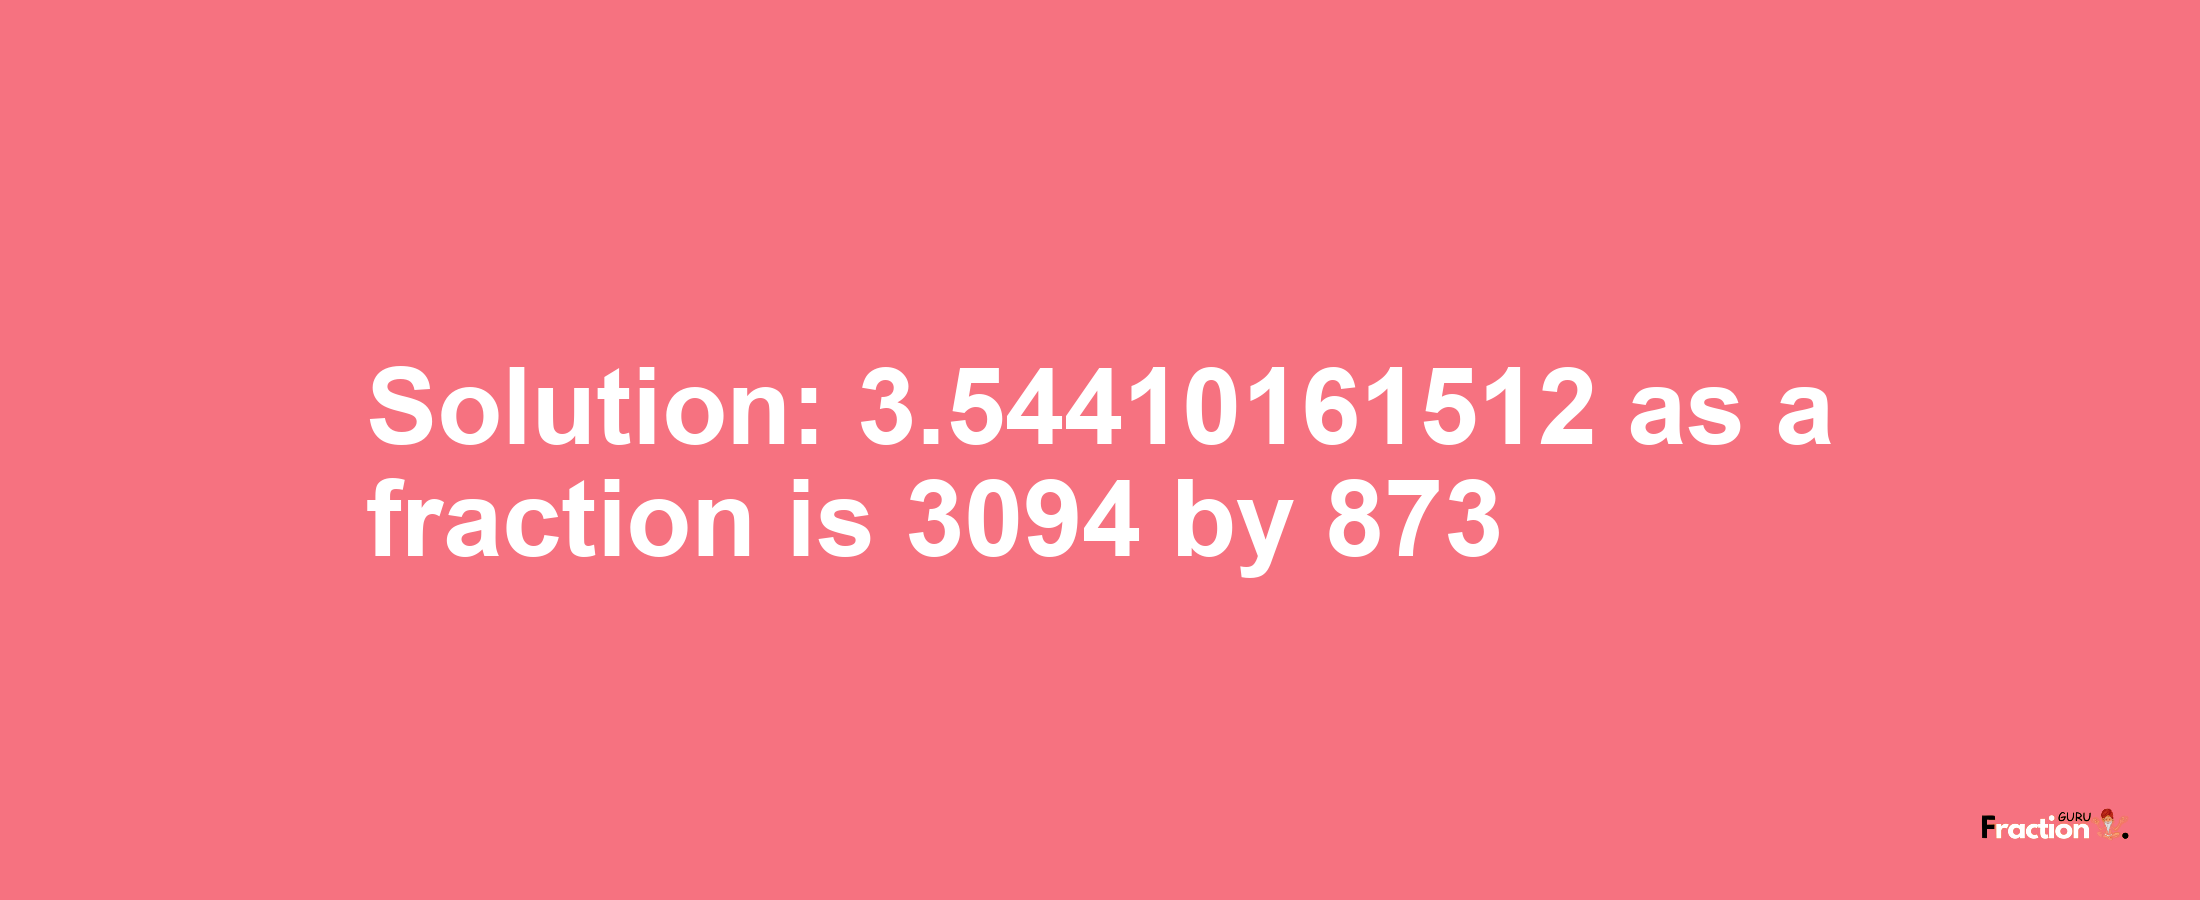 Solution:3.54410161512 as a fraction is 3094/873